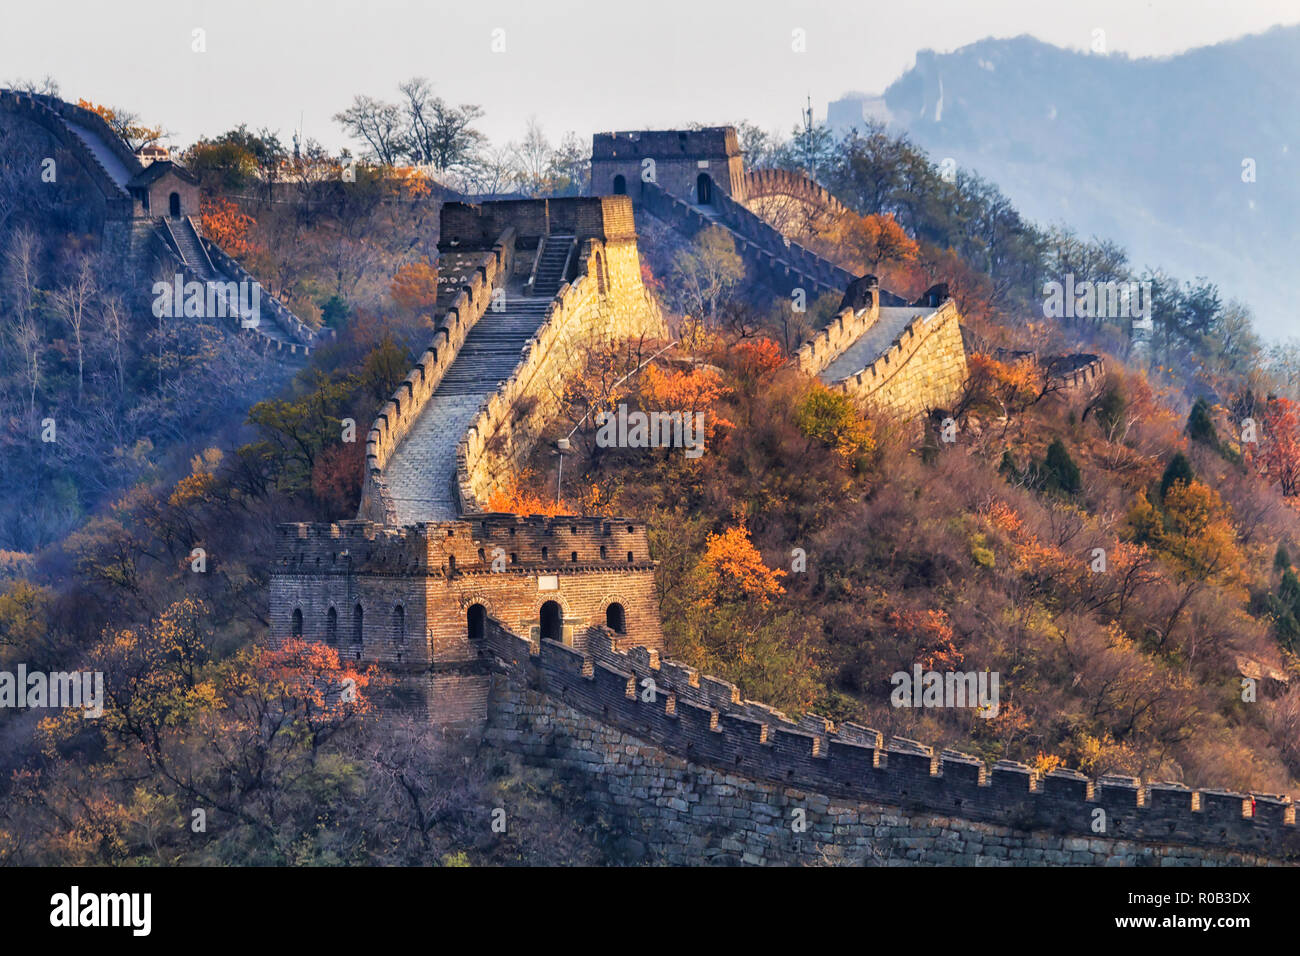 The Great Wall of China in a distant view with compressed towers and wall segments during autumn season in mountains near Beijing as ancient fortifica Stock Photo